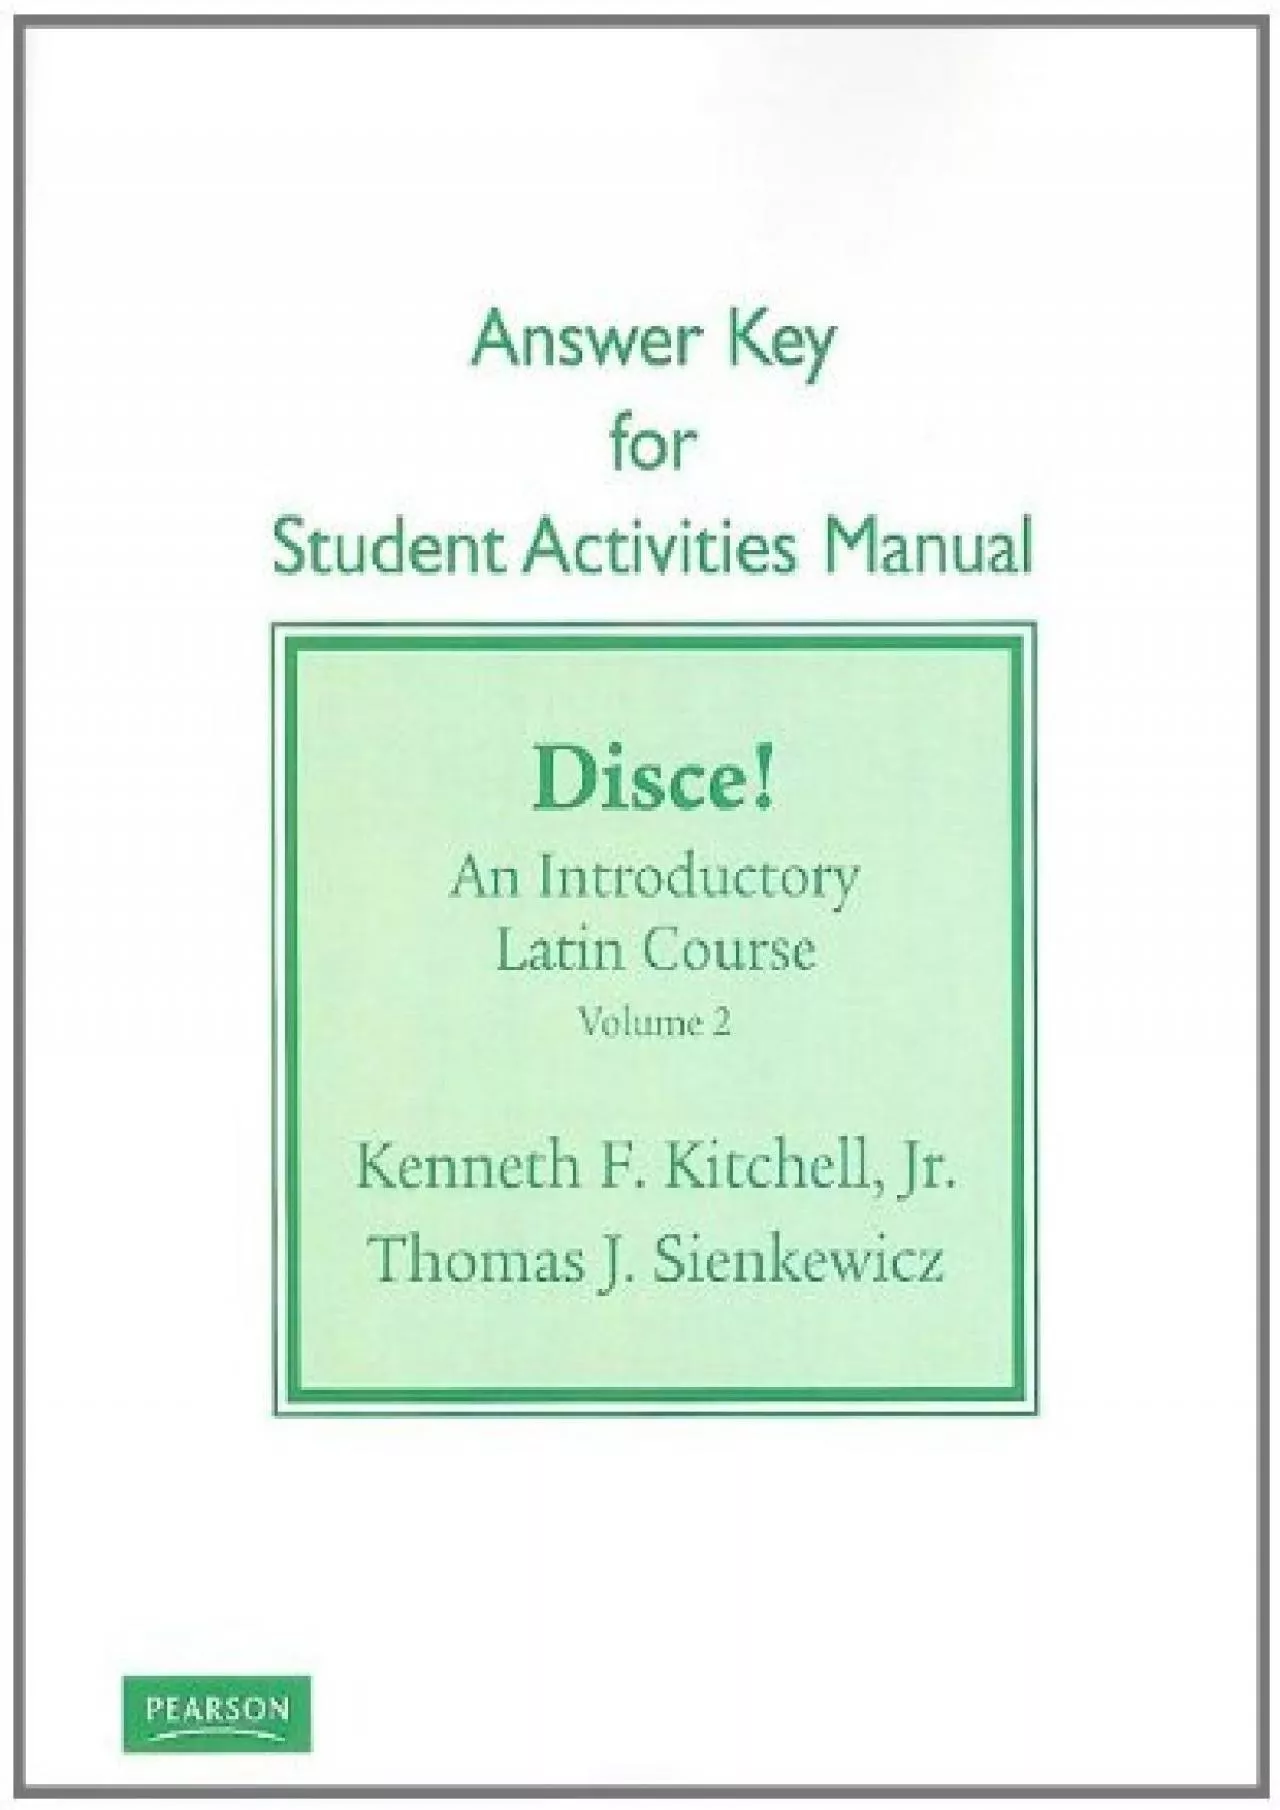 [FREE]-Student Activities Manual Answer Key for Disce! An Introductory Latin Course, Volume